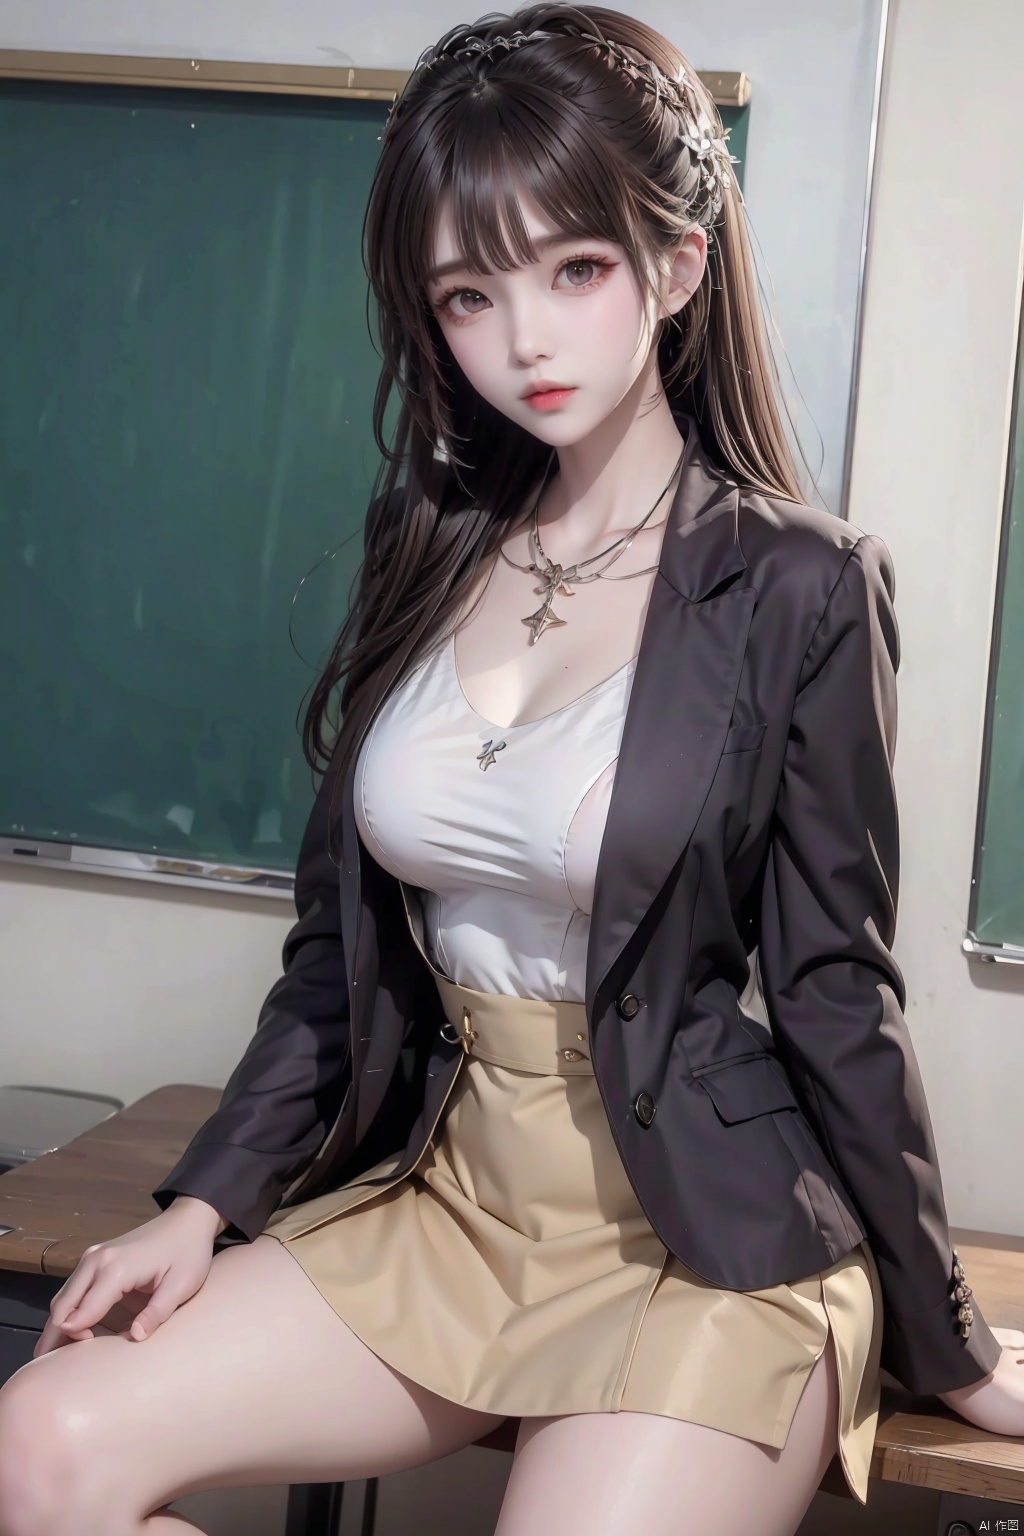  1girl, breasts, brown_eyes, brown_hair, chalkboard, classroom, cowboy_shot, desk, formal, glasses, hair_ornament, indoors, jacket, jewelry, looking_at_viewer, miniskirt, necklace, on_desk, pencil_skirt, school_desk, sitting_on_desk, skirt, solo, standing, suit, yeqinxian, yunxi